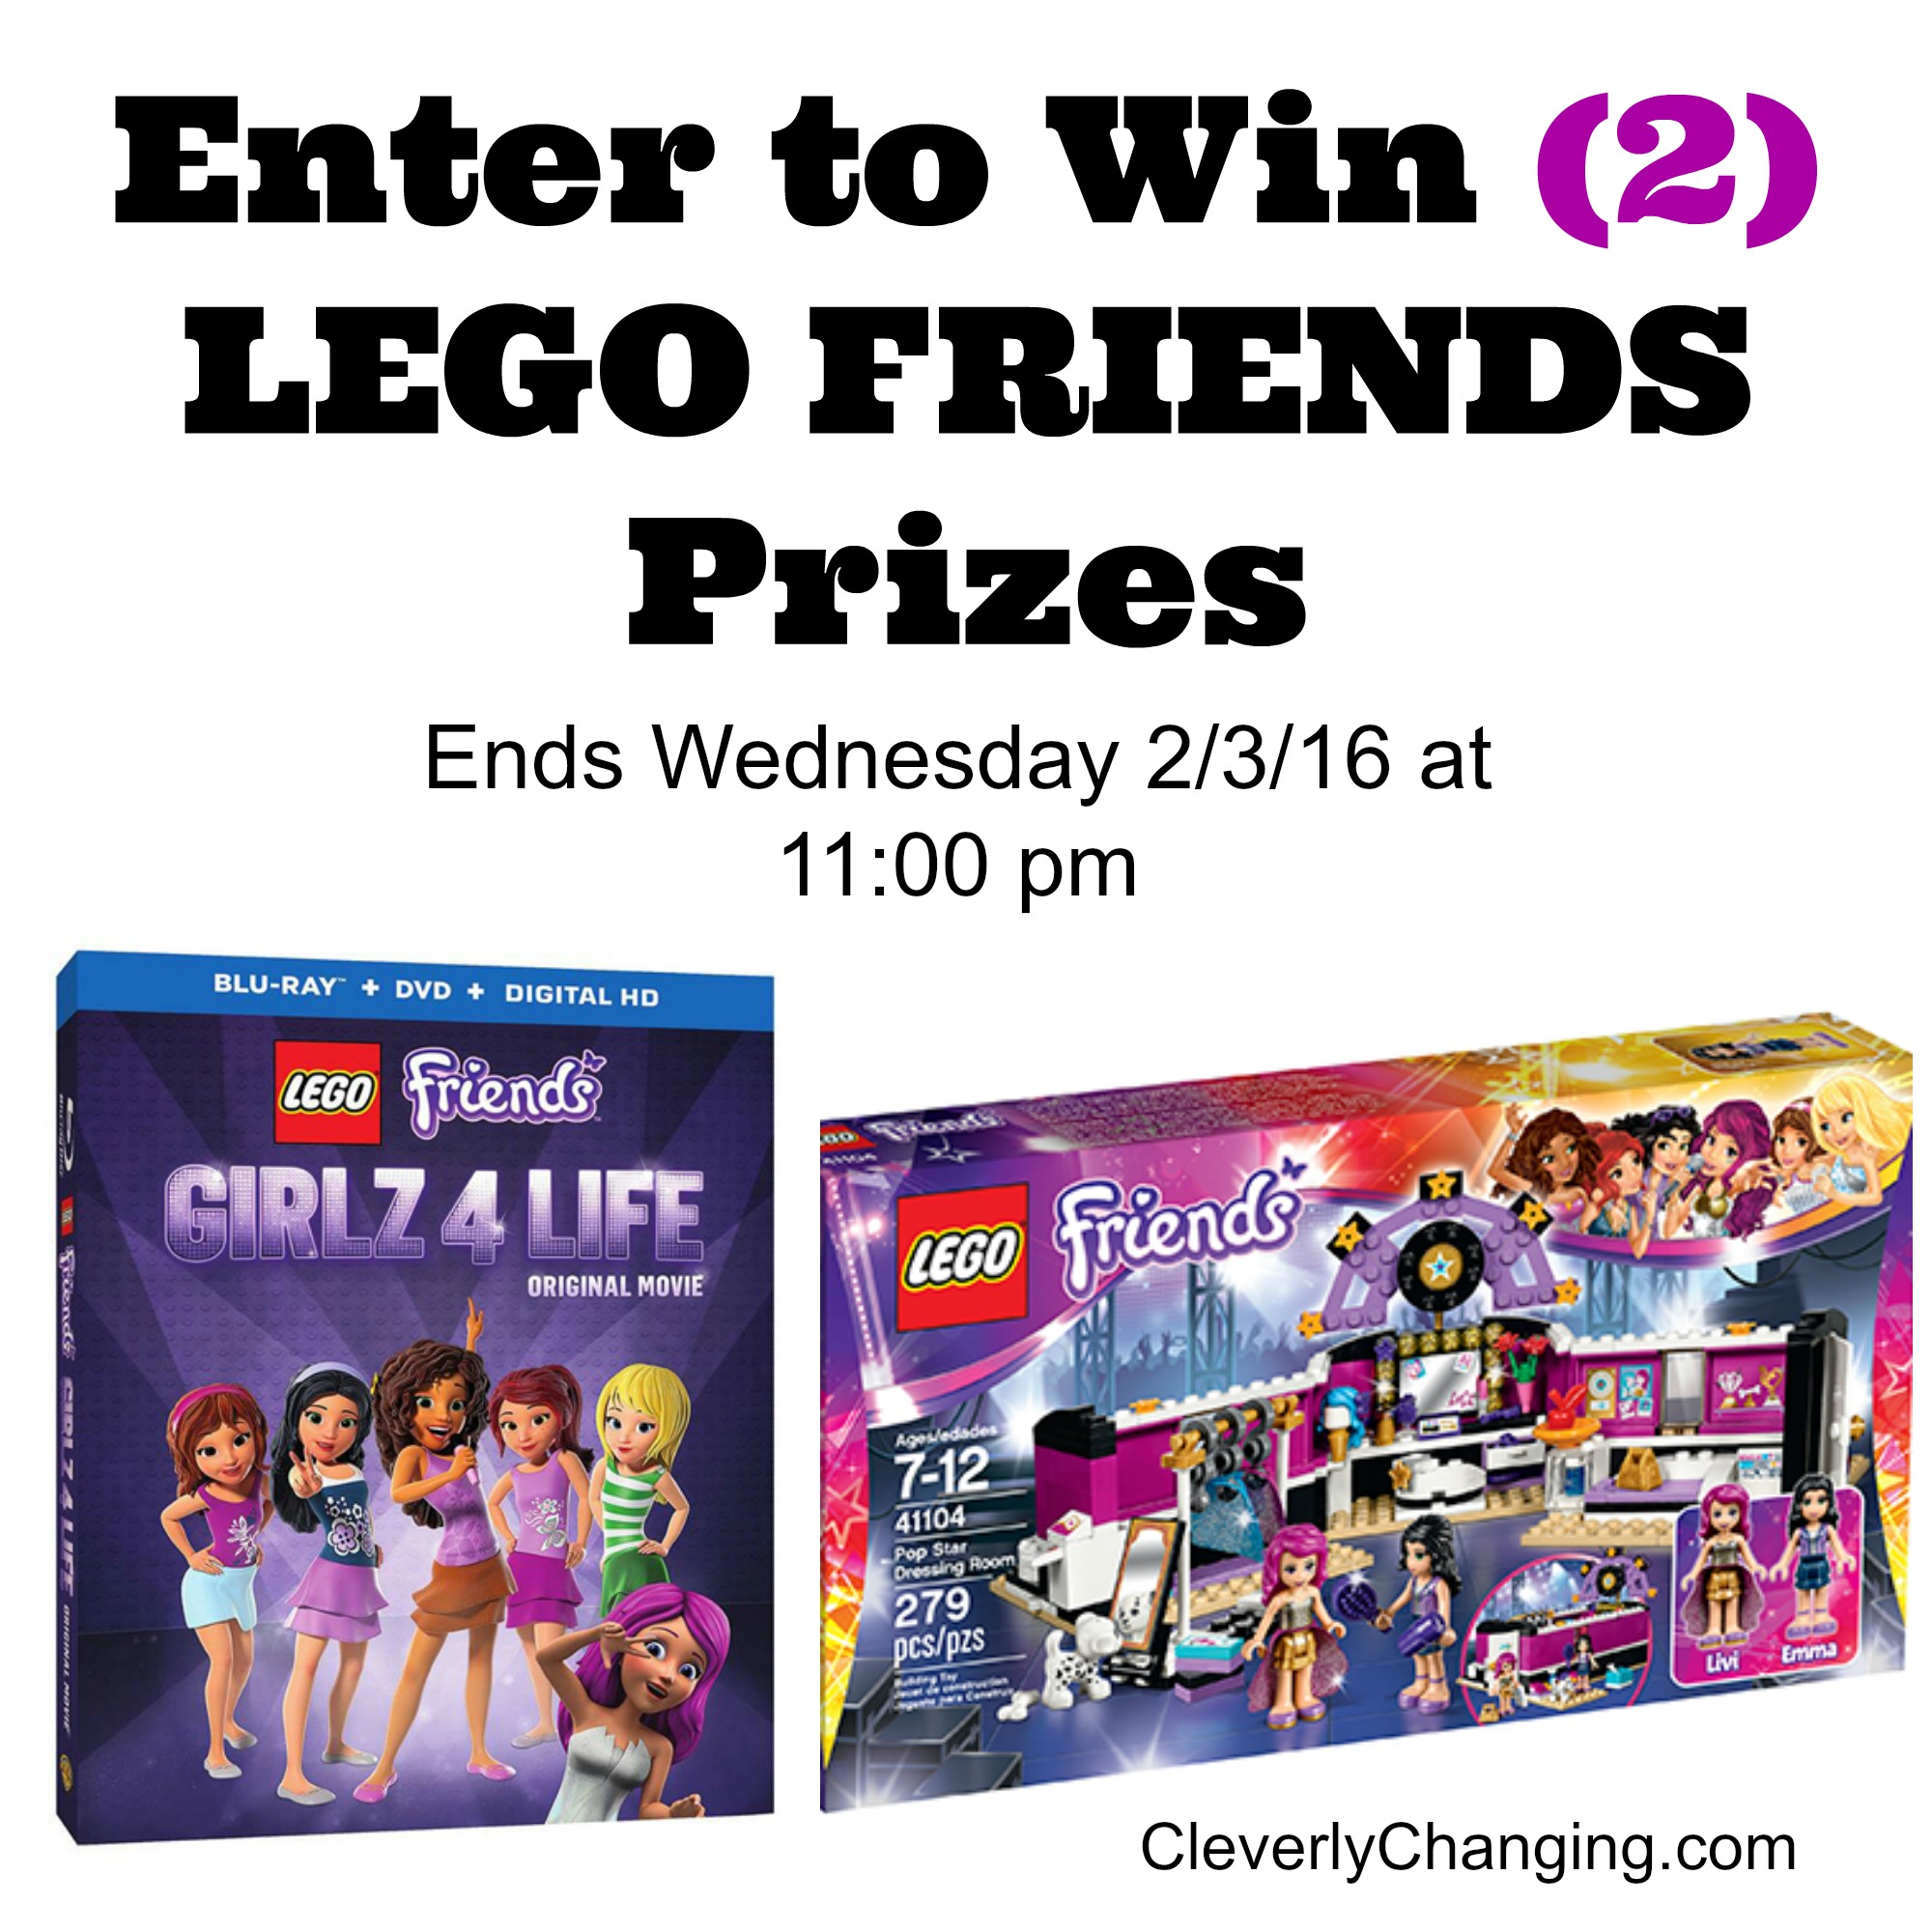 Lego Friends DVD and Set Giveaway